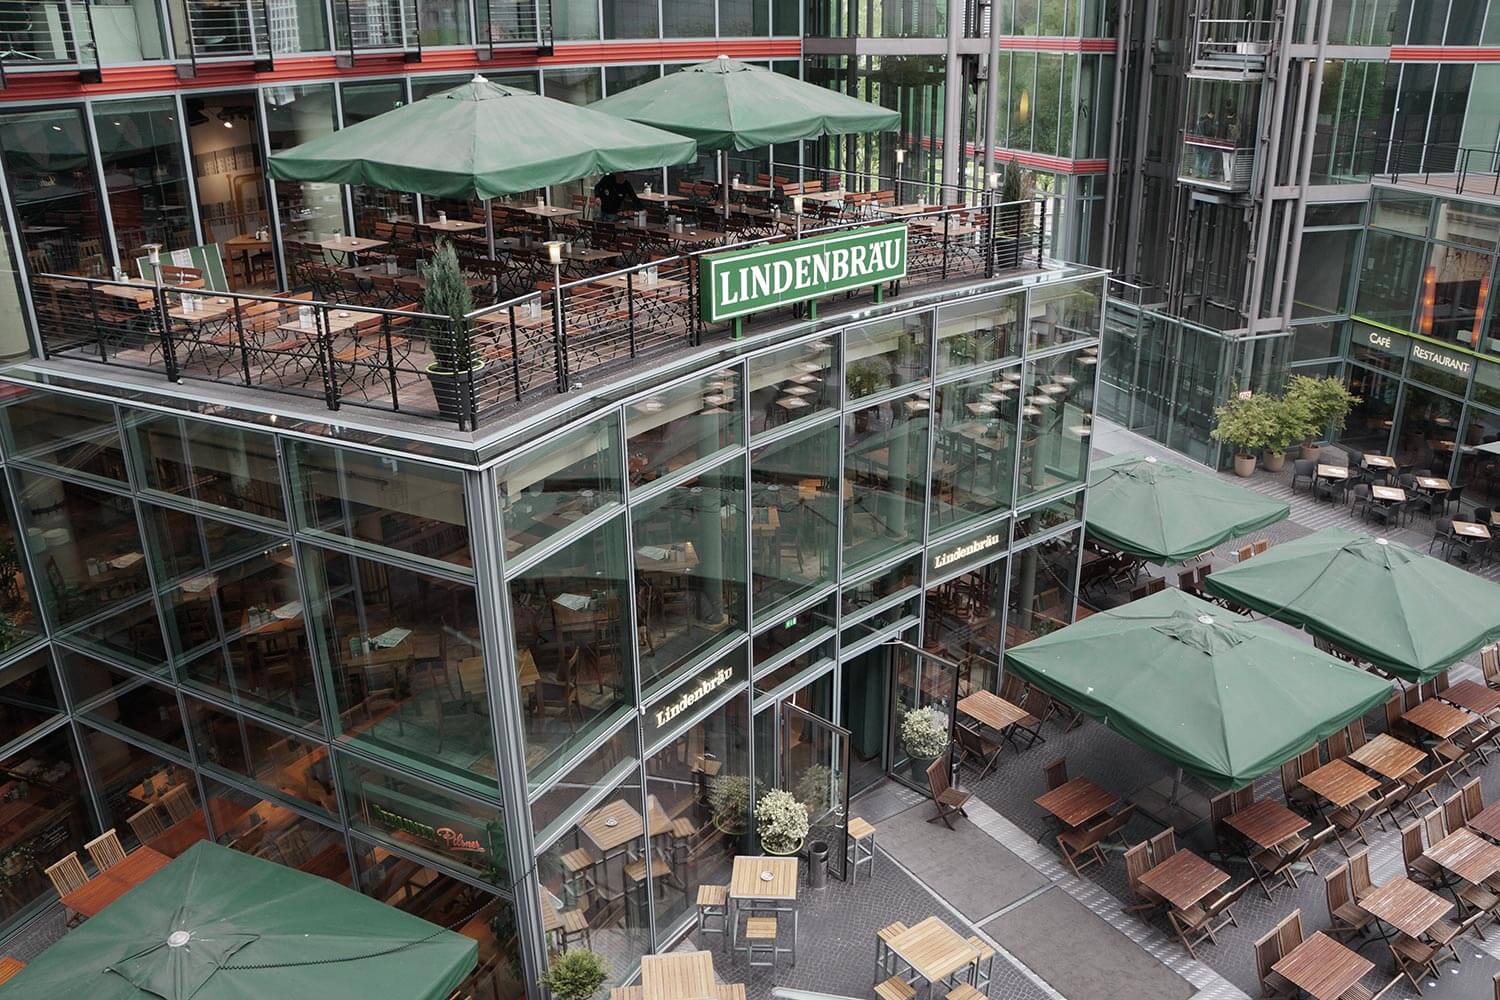 Location Lindenbrau In The Sony Center At The Potsdamer Platz